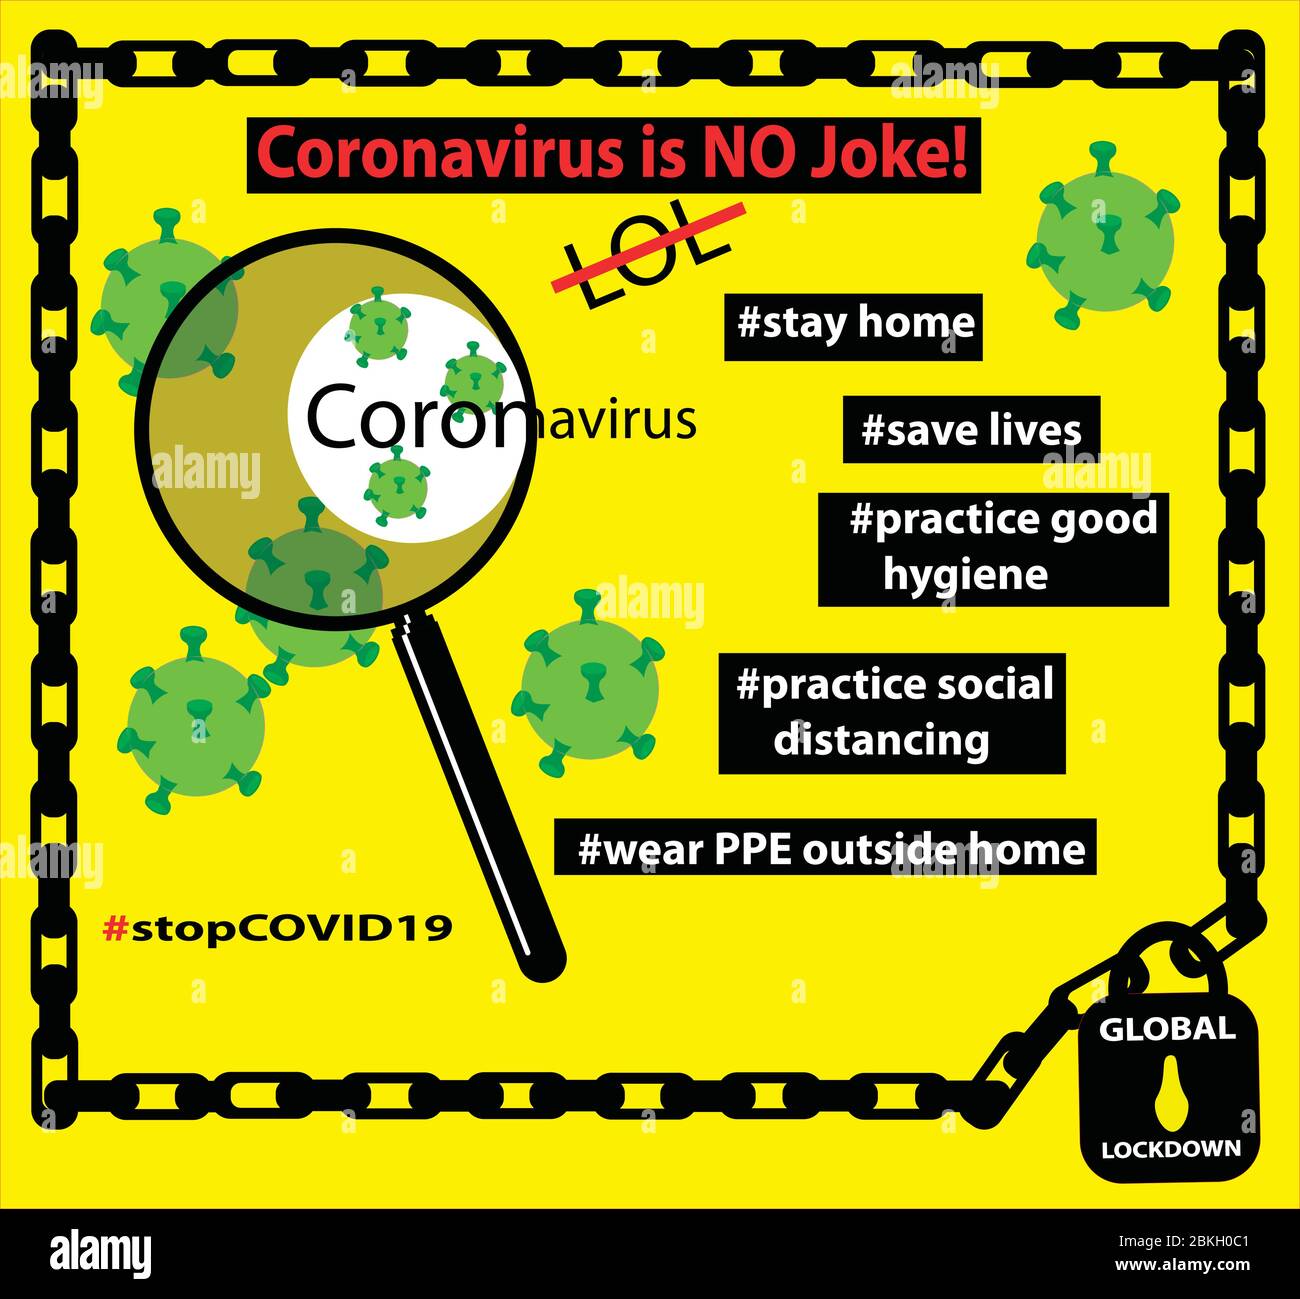 yellow corona virus info-graph with preventative care tips to control the spread of the virus because corona is no joke it caused a global lock down Stock Vector